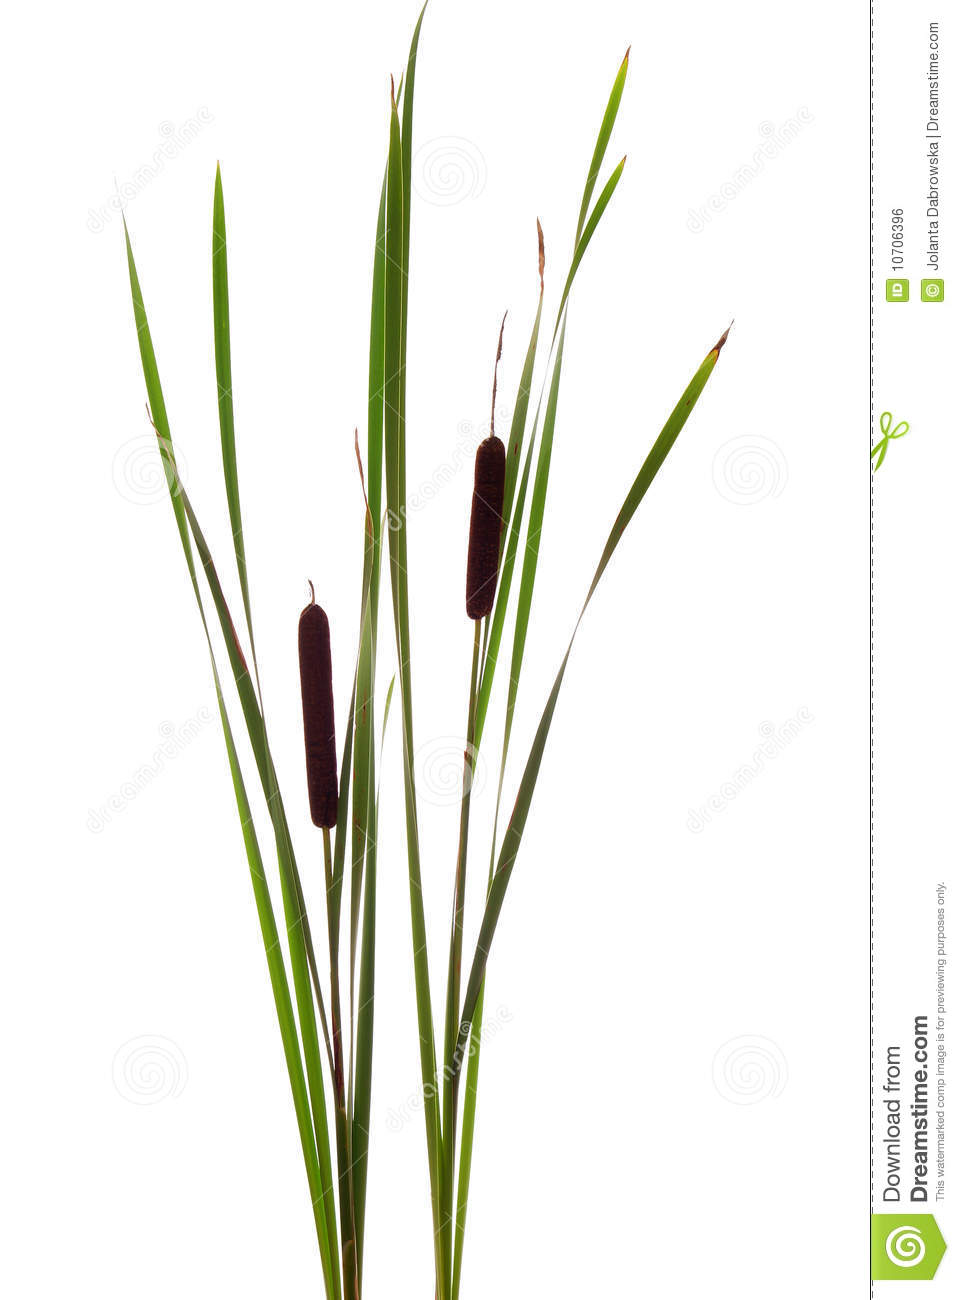 Cattails Royalty Free Stock Image   Image  10706396